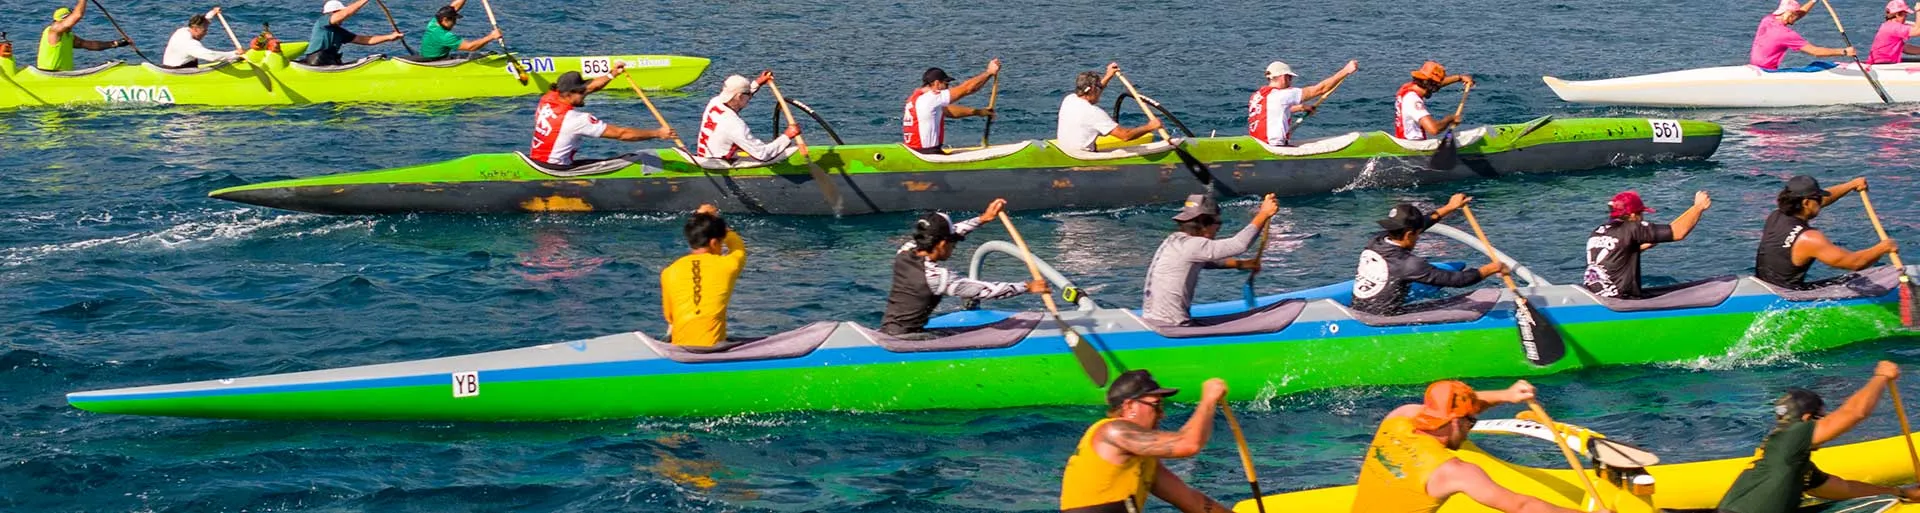 Unlimited class canoes racing outside Hanalei